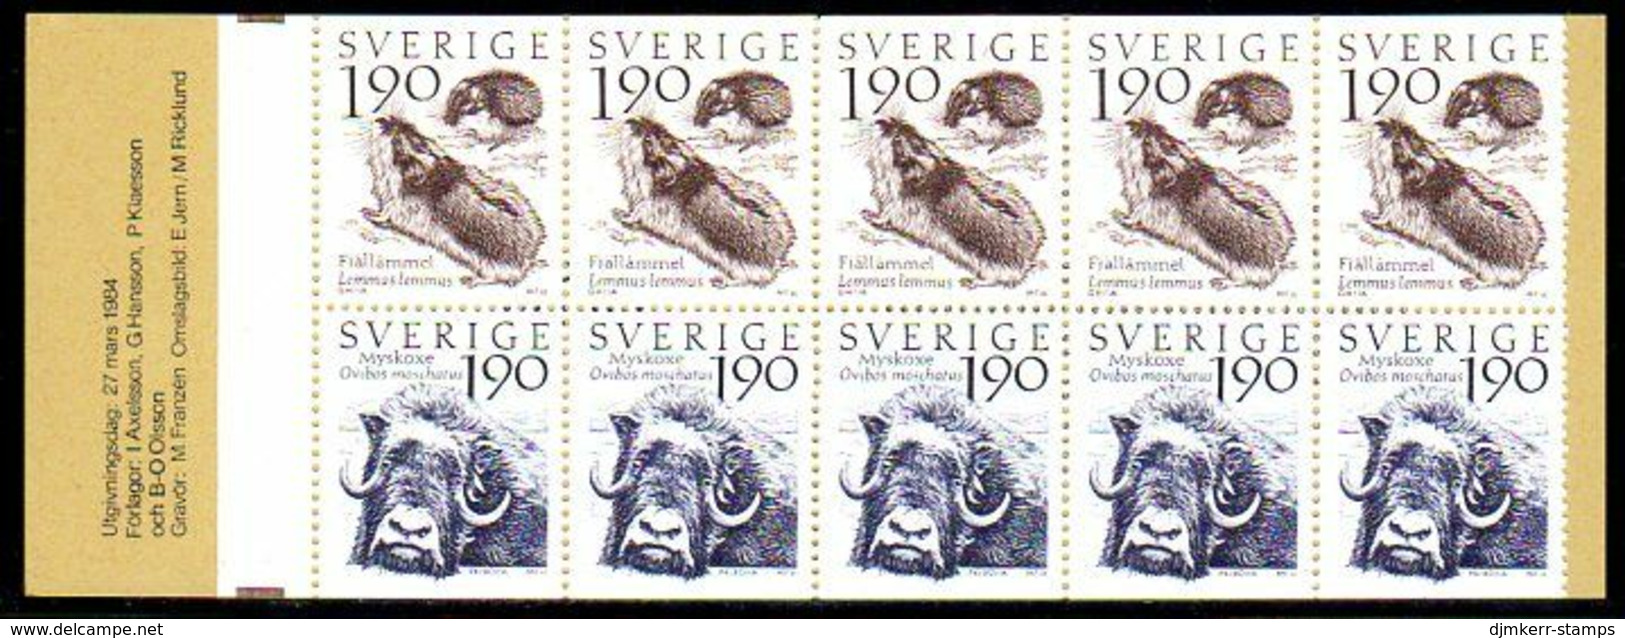 SWEDEN 1984 Nature Protection Booklet MNH / **.  Michel MH97 - 1981-..